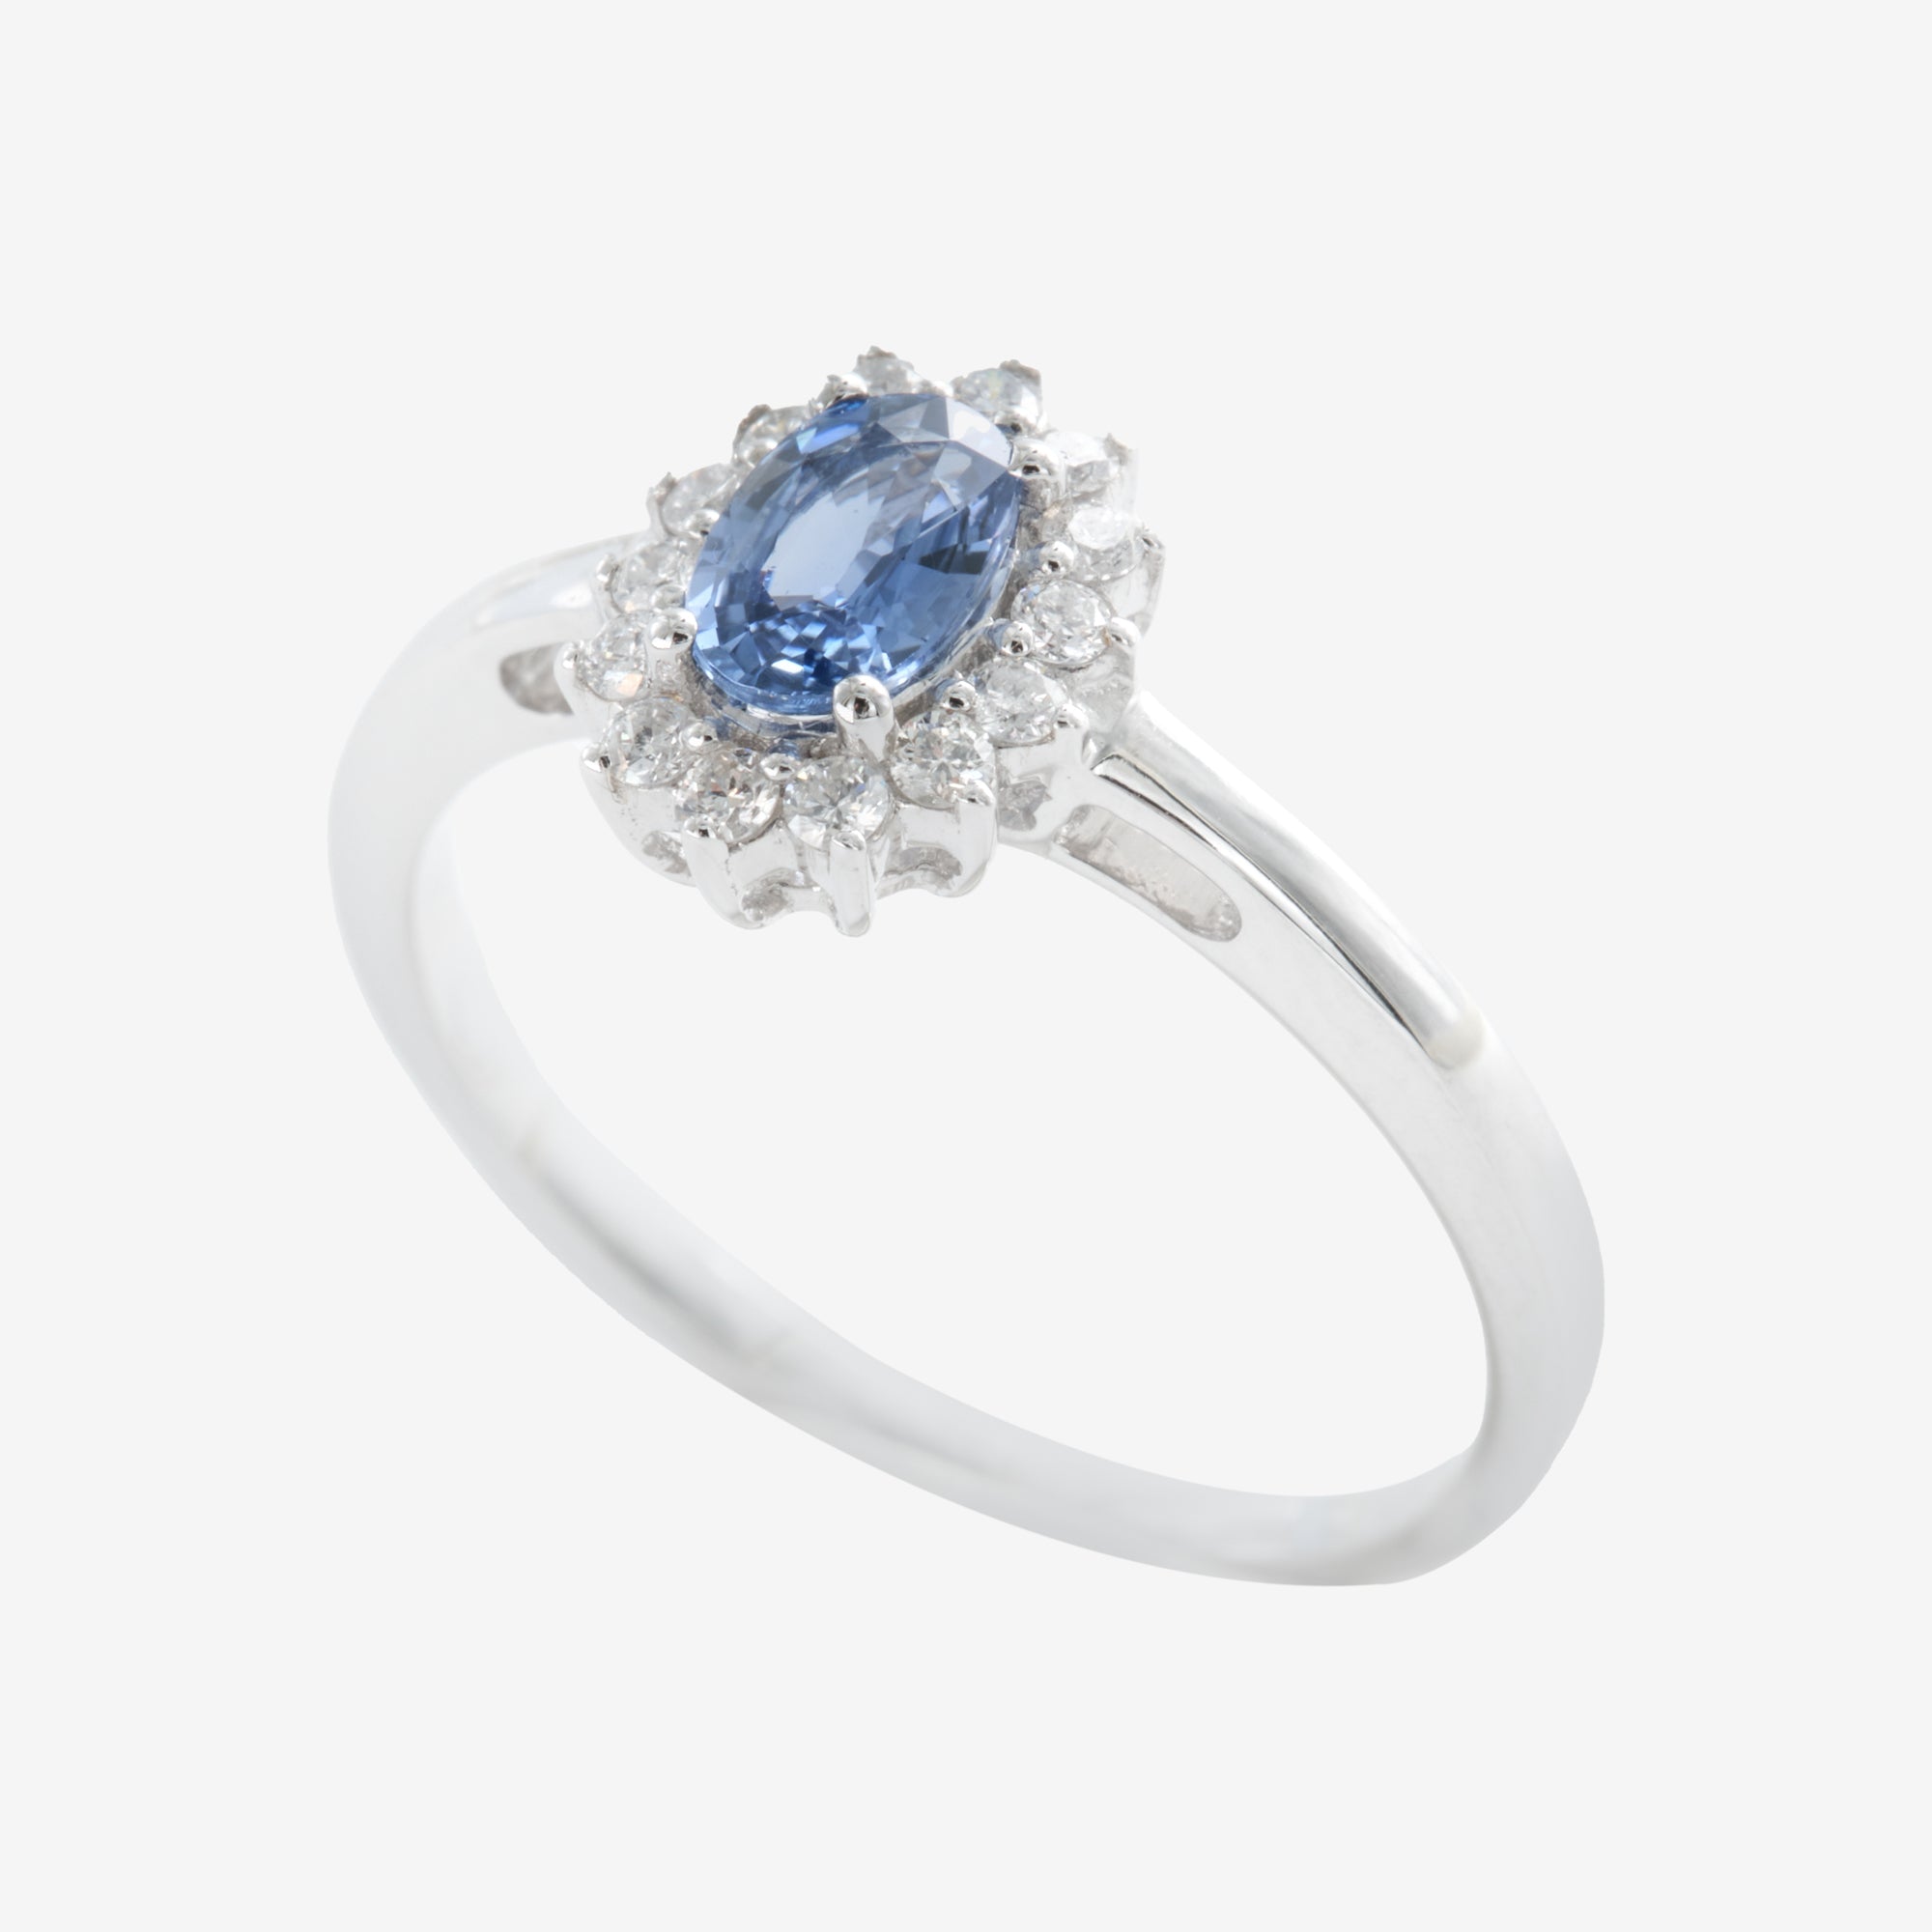 TIA RING WITH SAPPHIRE AND DIAMONDS